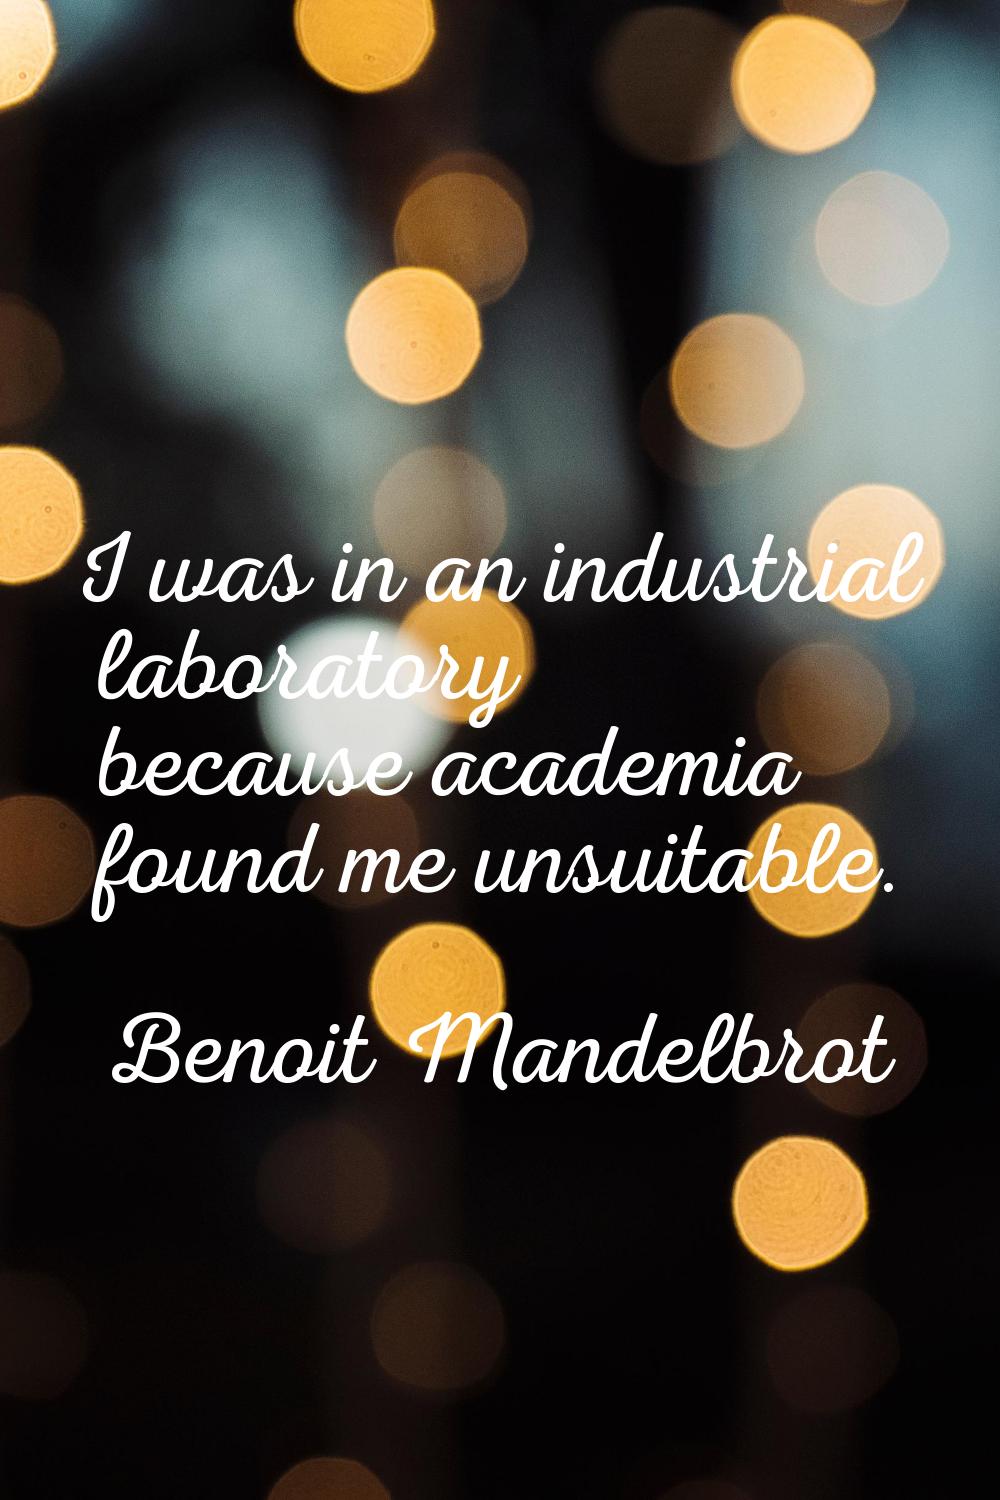 I was in an industrial laboratory because academia found me unsuitable.